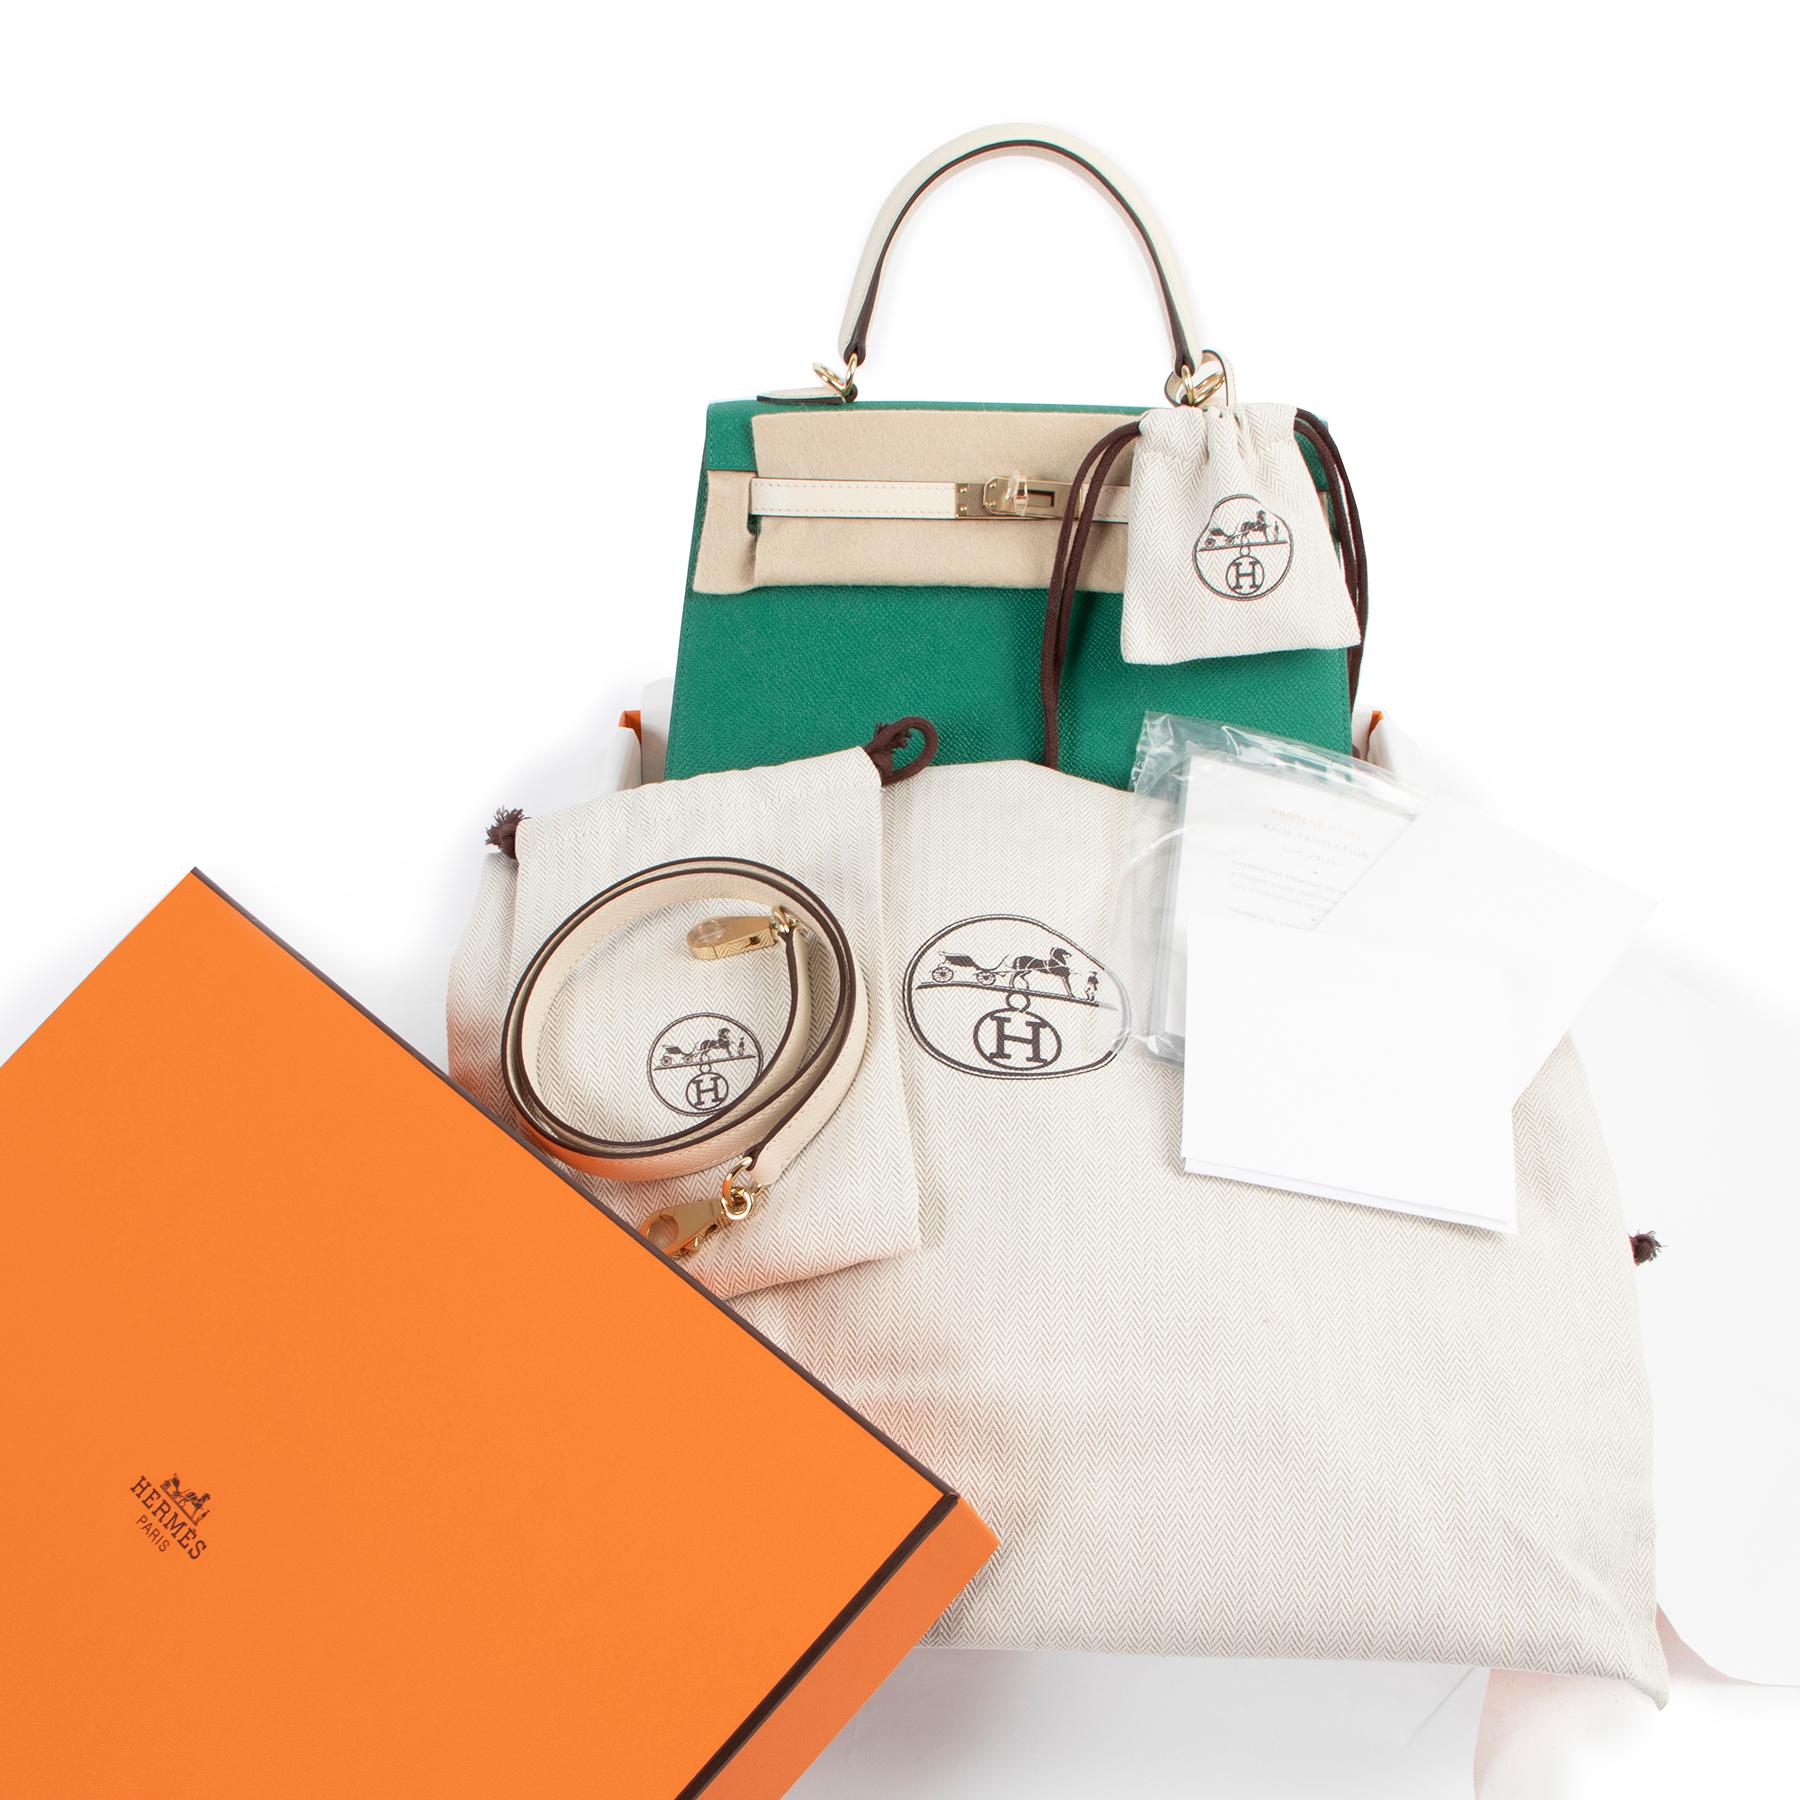 Hermès Kelly Sellier 25 Perso Veau Epsom Vertigo / Craie GHW

A beautiful combination of Vert Vertigo and tonal Craie make this Hermès Kelly 25 Perso a feast for the eyes! Crafted out of finely structured Epsom leather, which is known to be durable